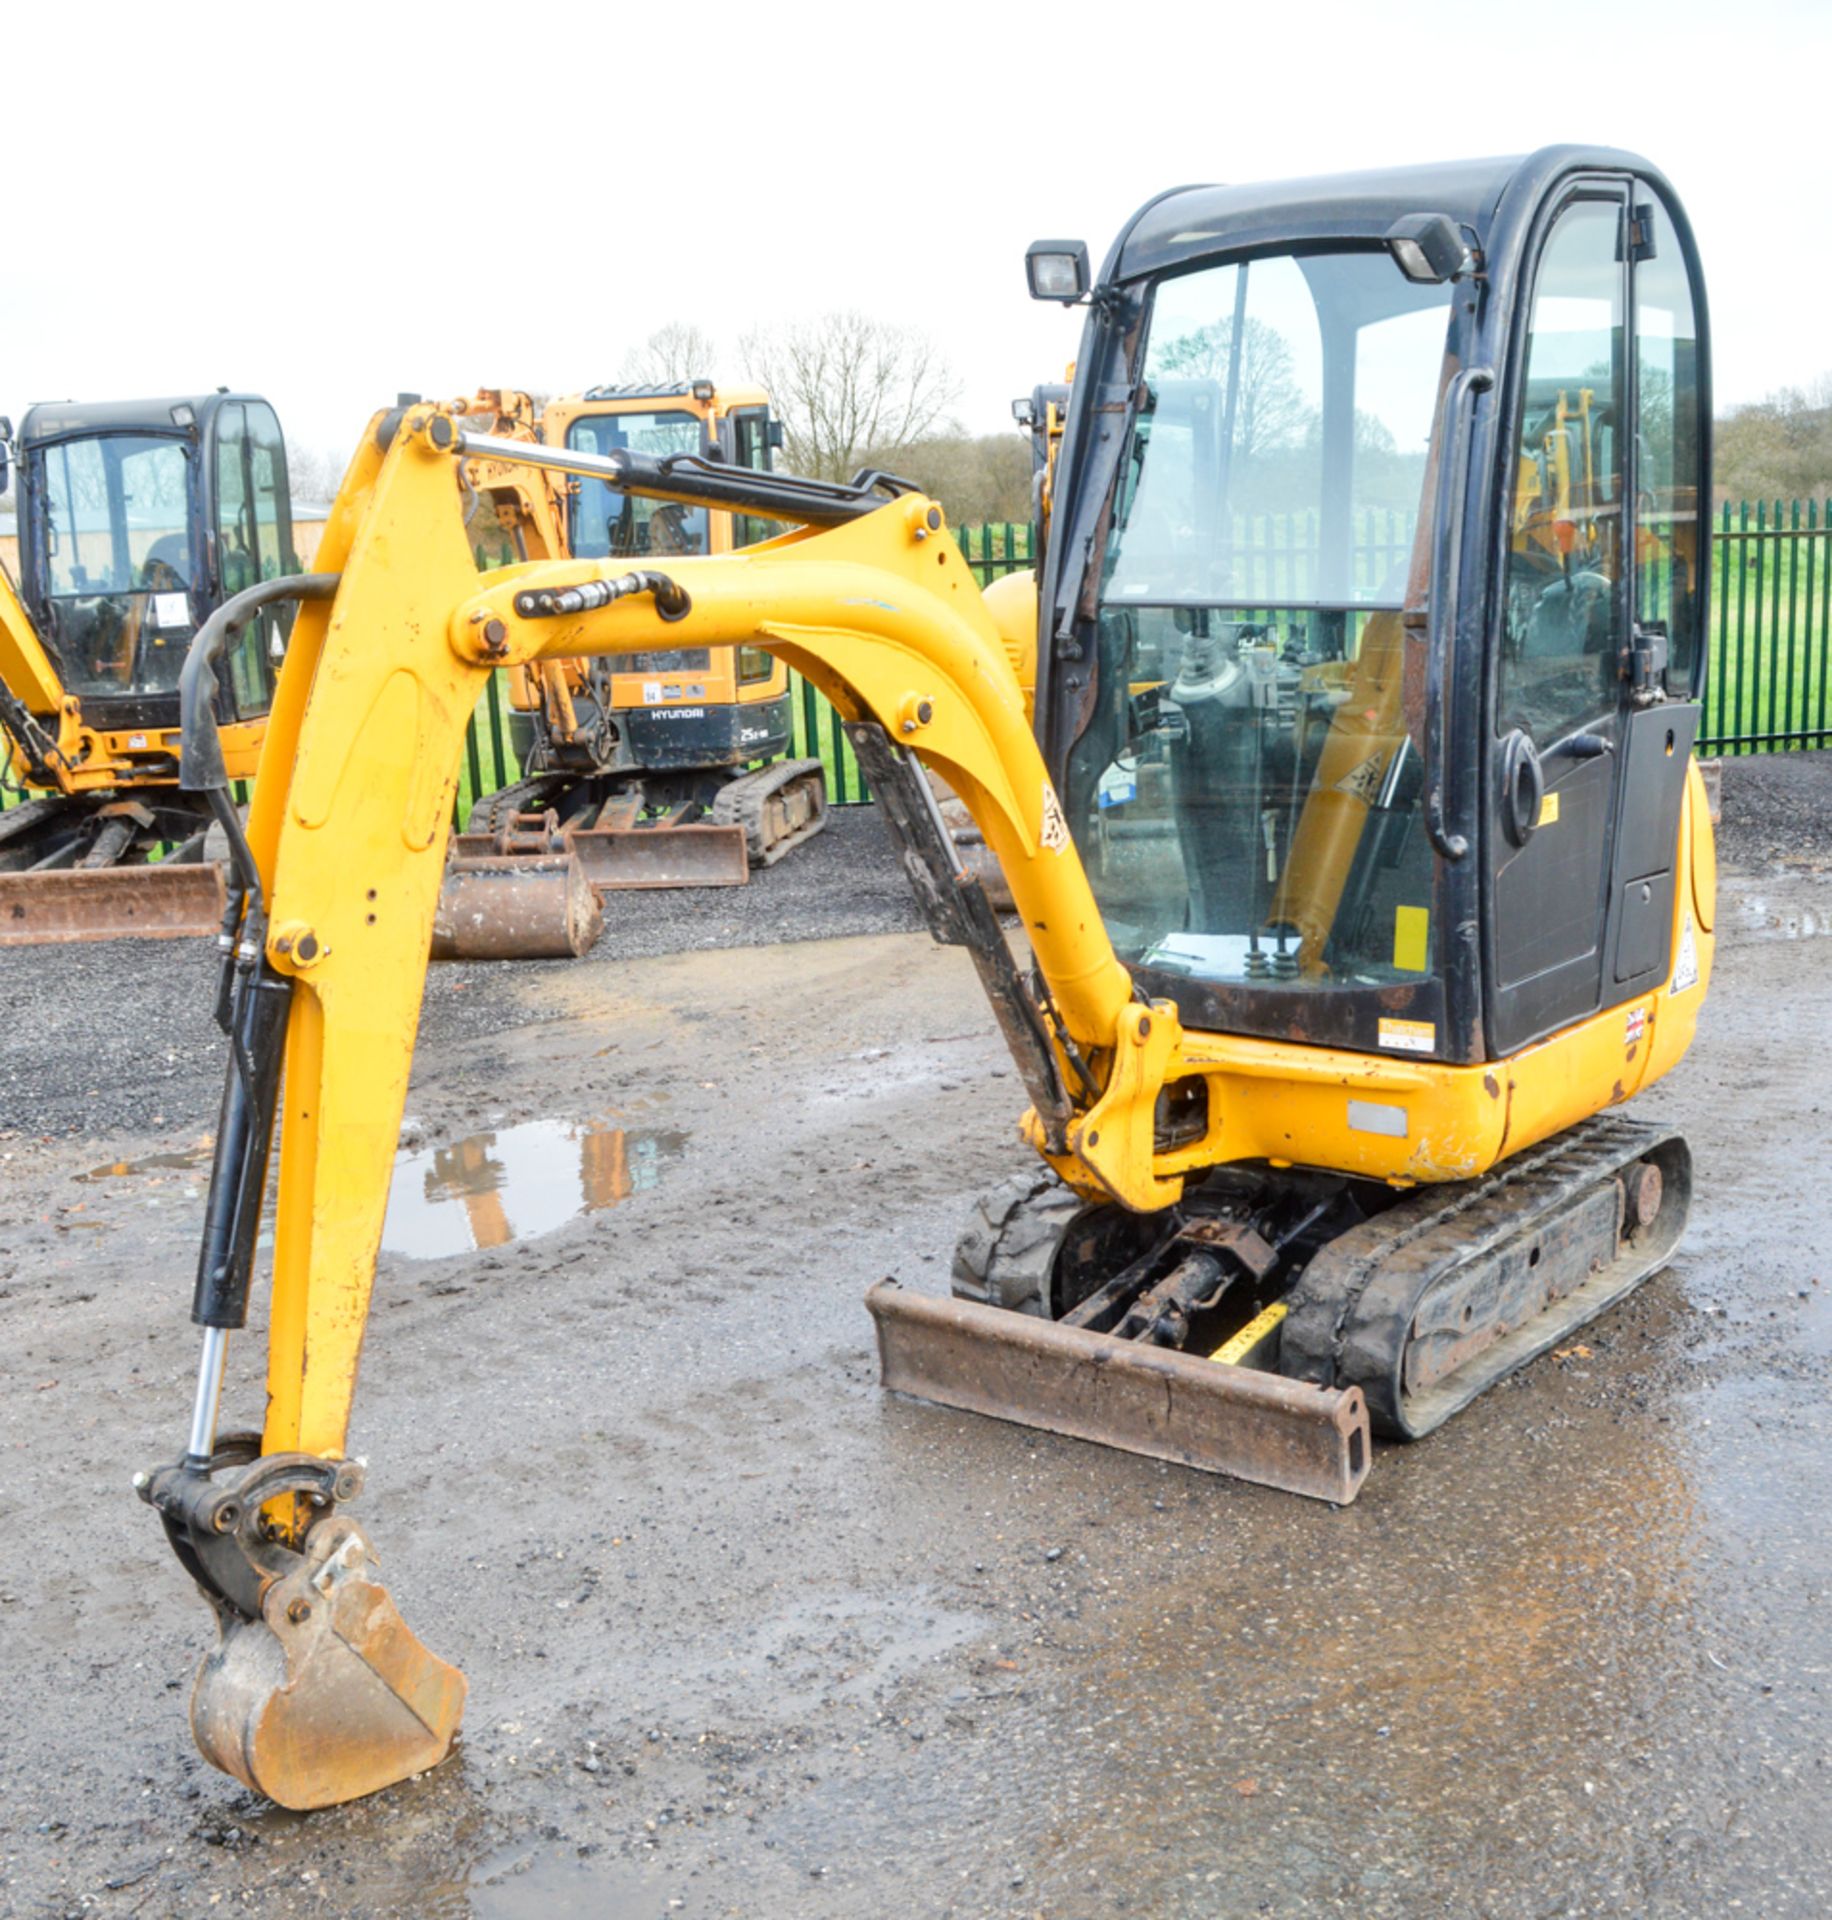 JCB 801.6 1.5 tonne rubber tracked mini excavator Year: 2012 S/N: 1794962 Recorded Hours: 1846